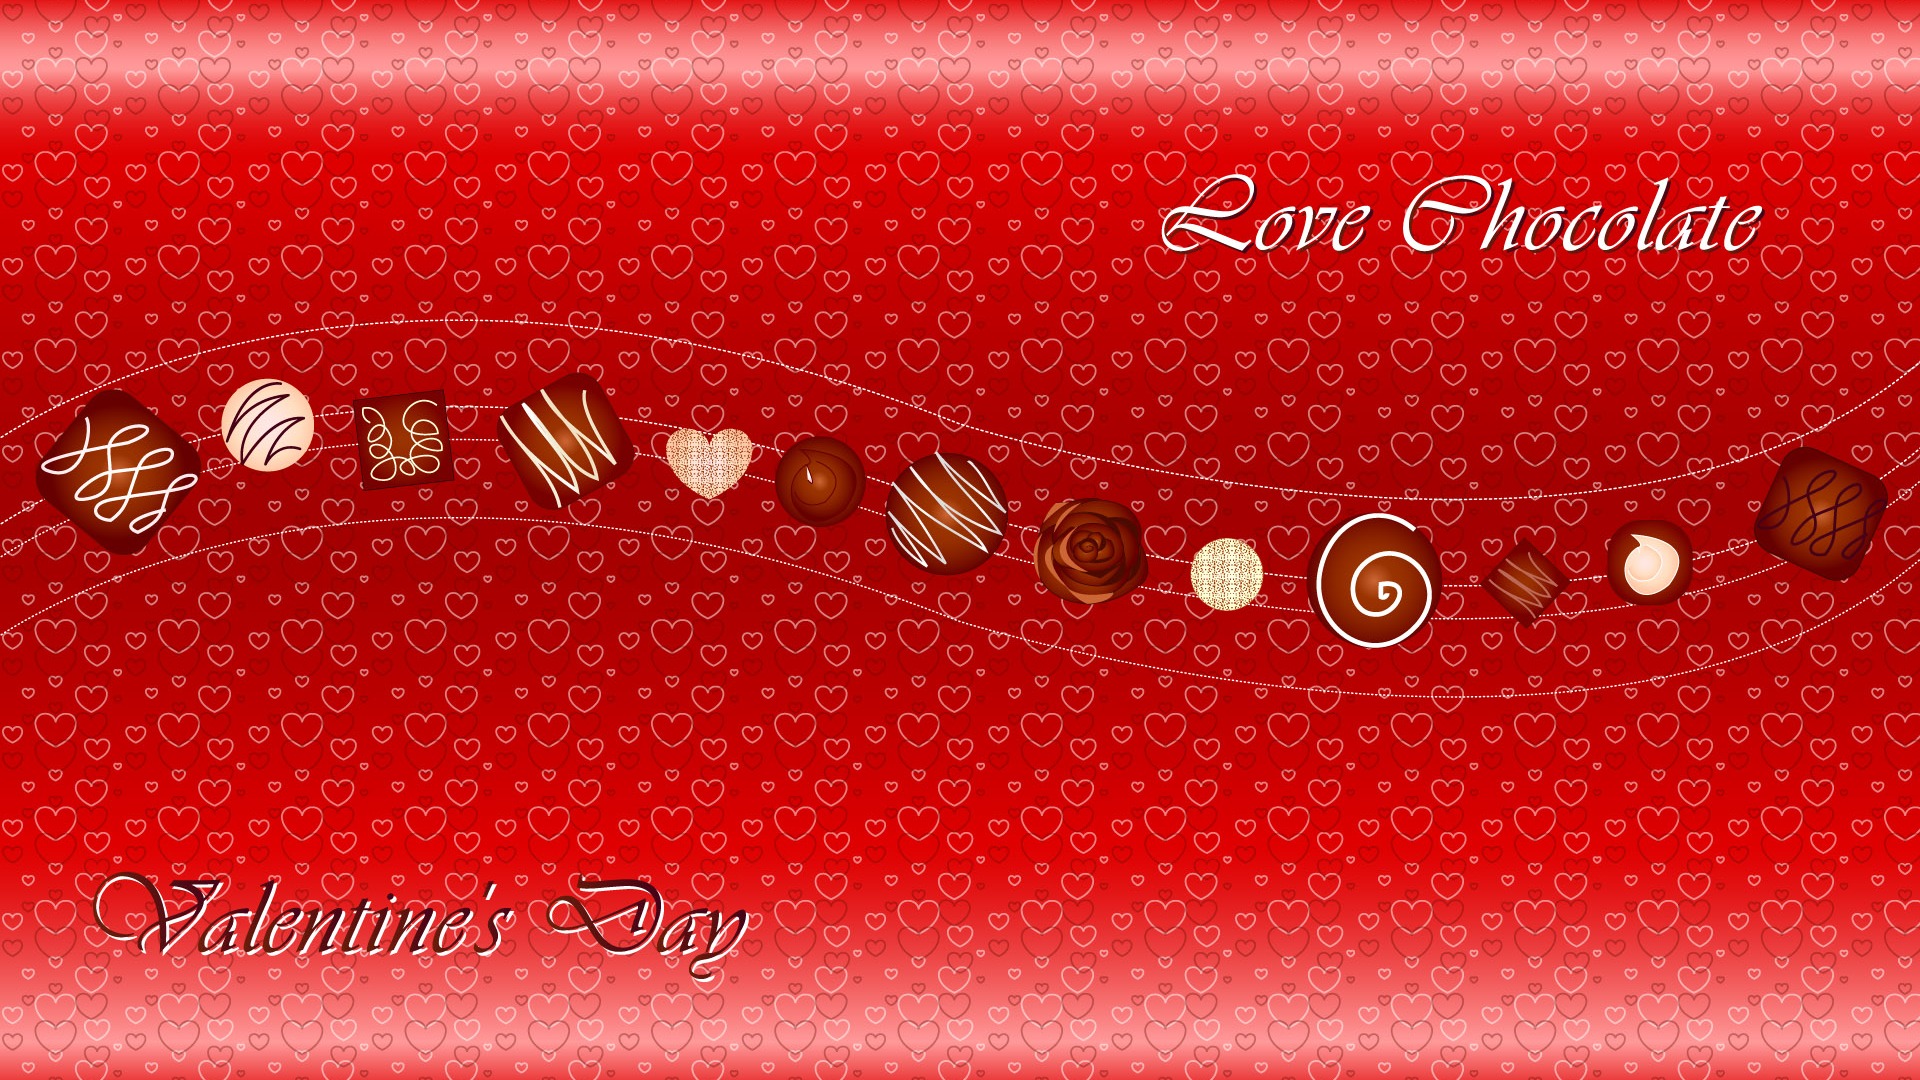 Valentine's Day Theme Wallpapers (1) #2 - 1920x1080